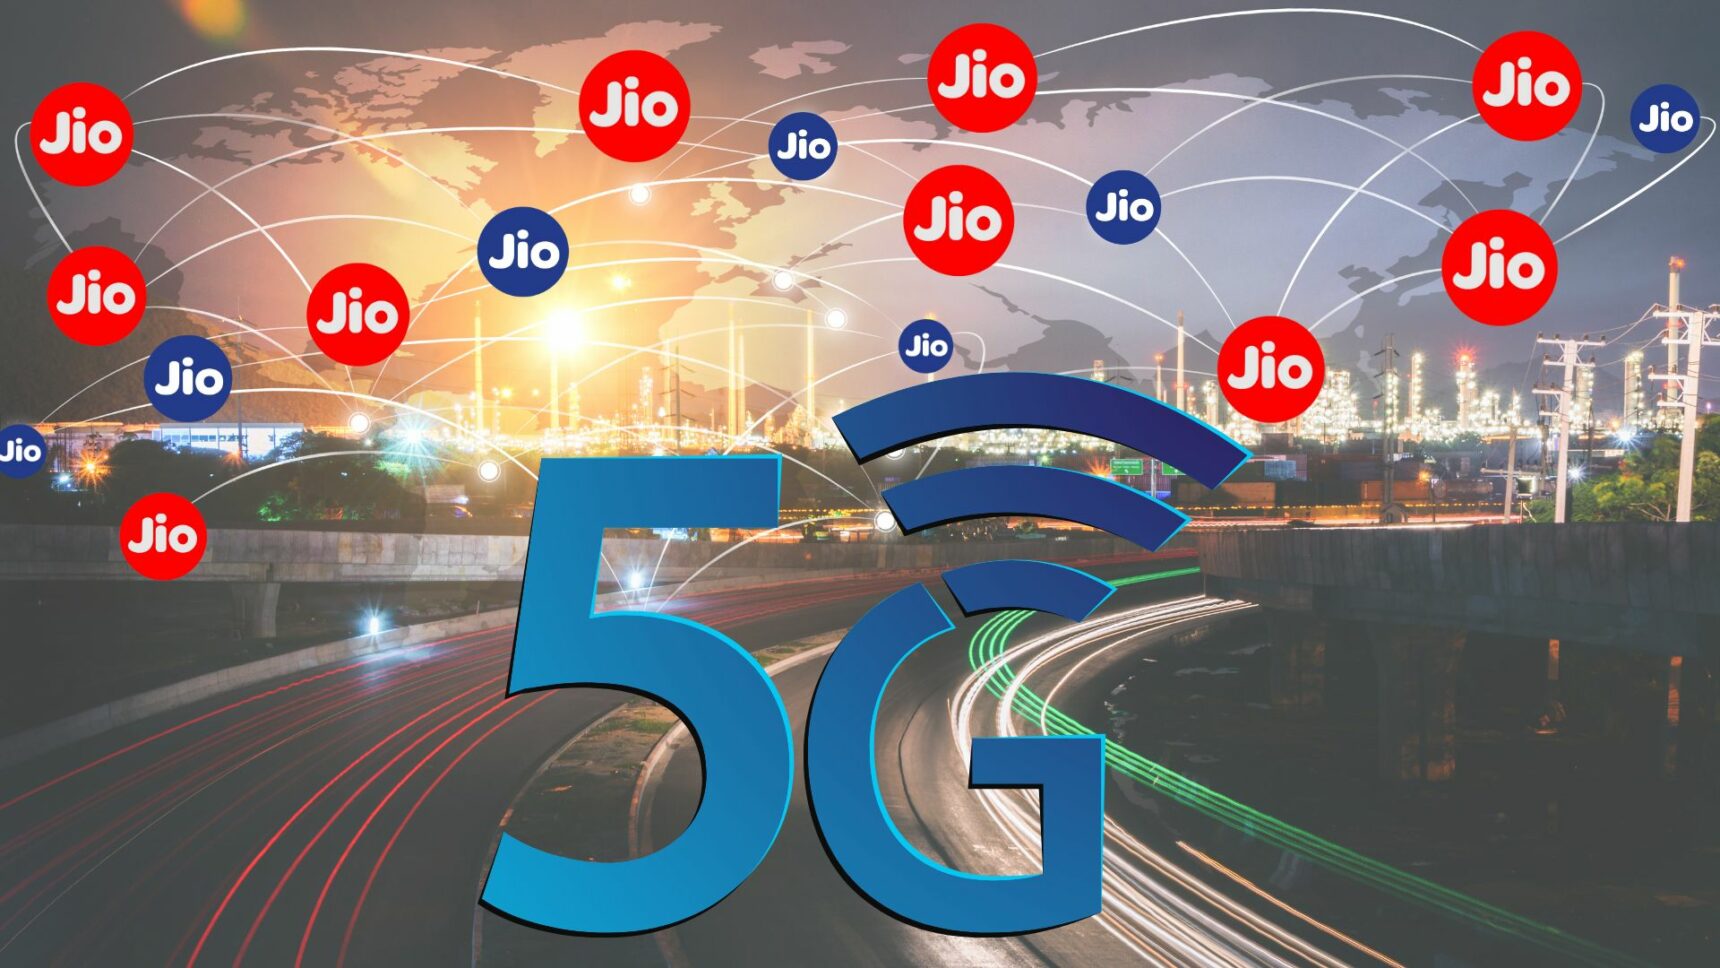 jio 5g network launches in mps bhopal and indore ep